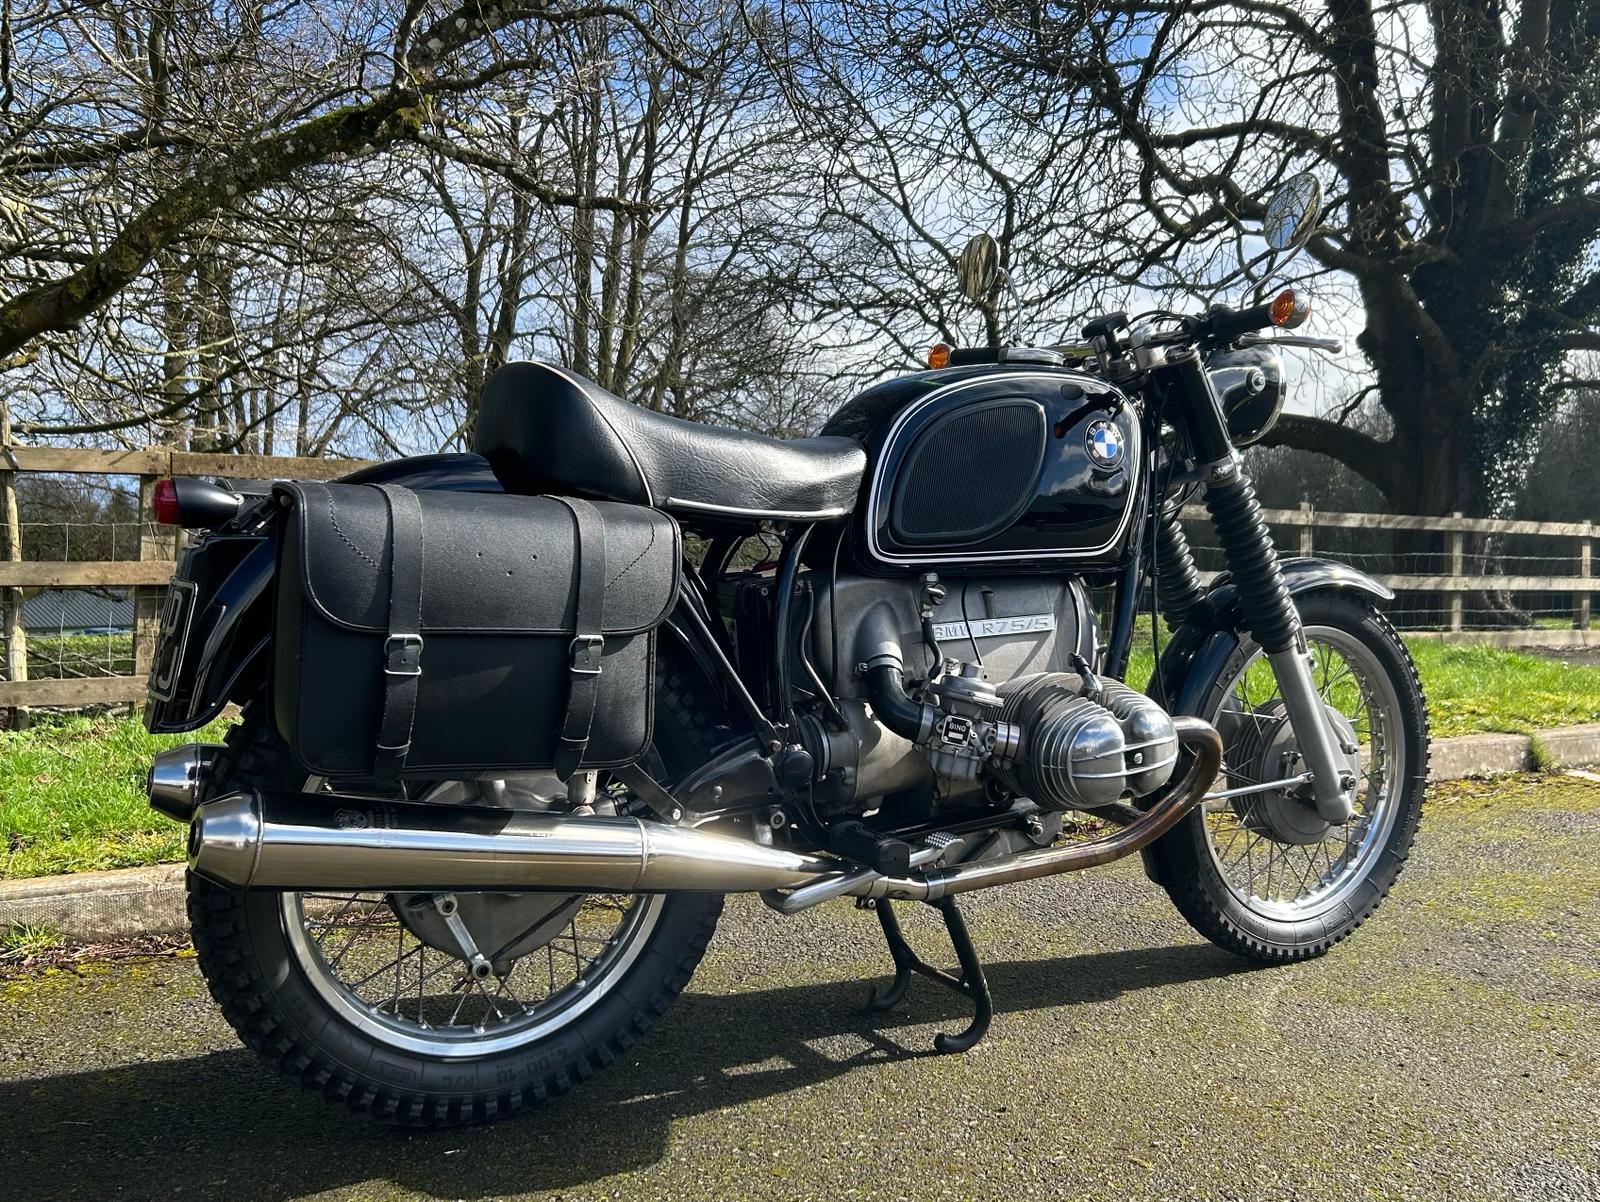 A BMW R75/5 MOTORCYCLE .1971. 72452 MILES. EXCELLENT WELL RESTORED CONDITION, V5, MOT AND TAX - Image 2 of 17